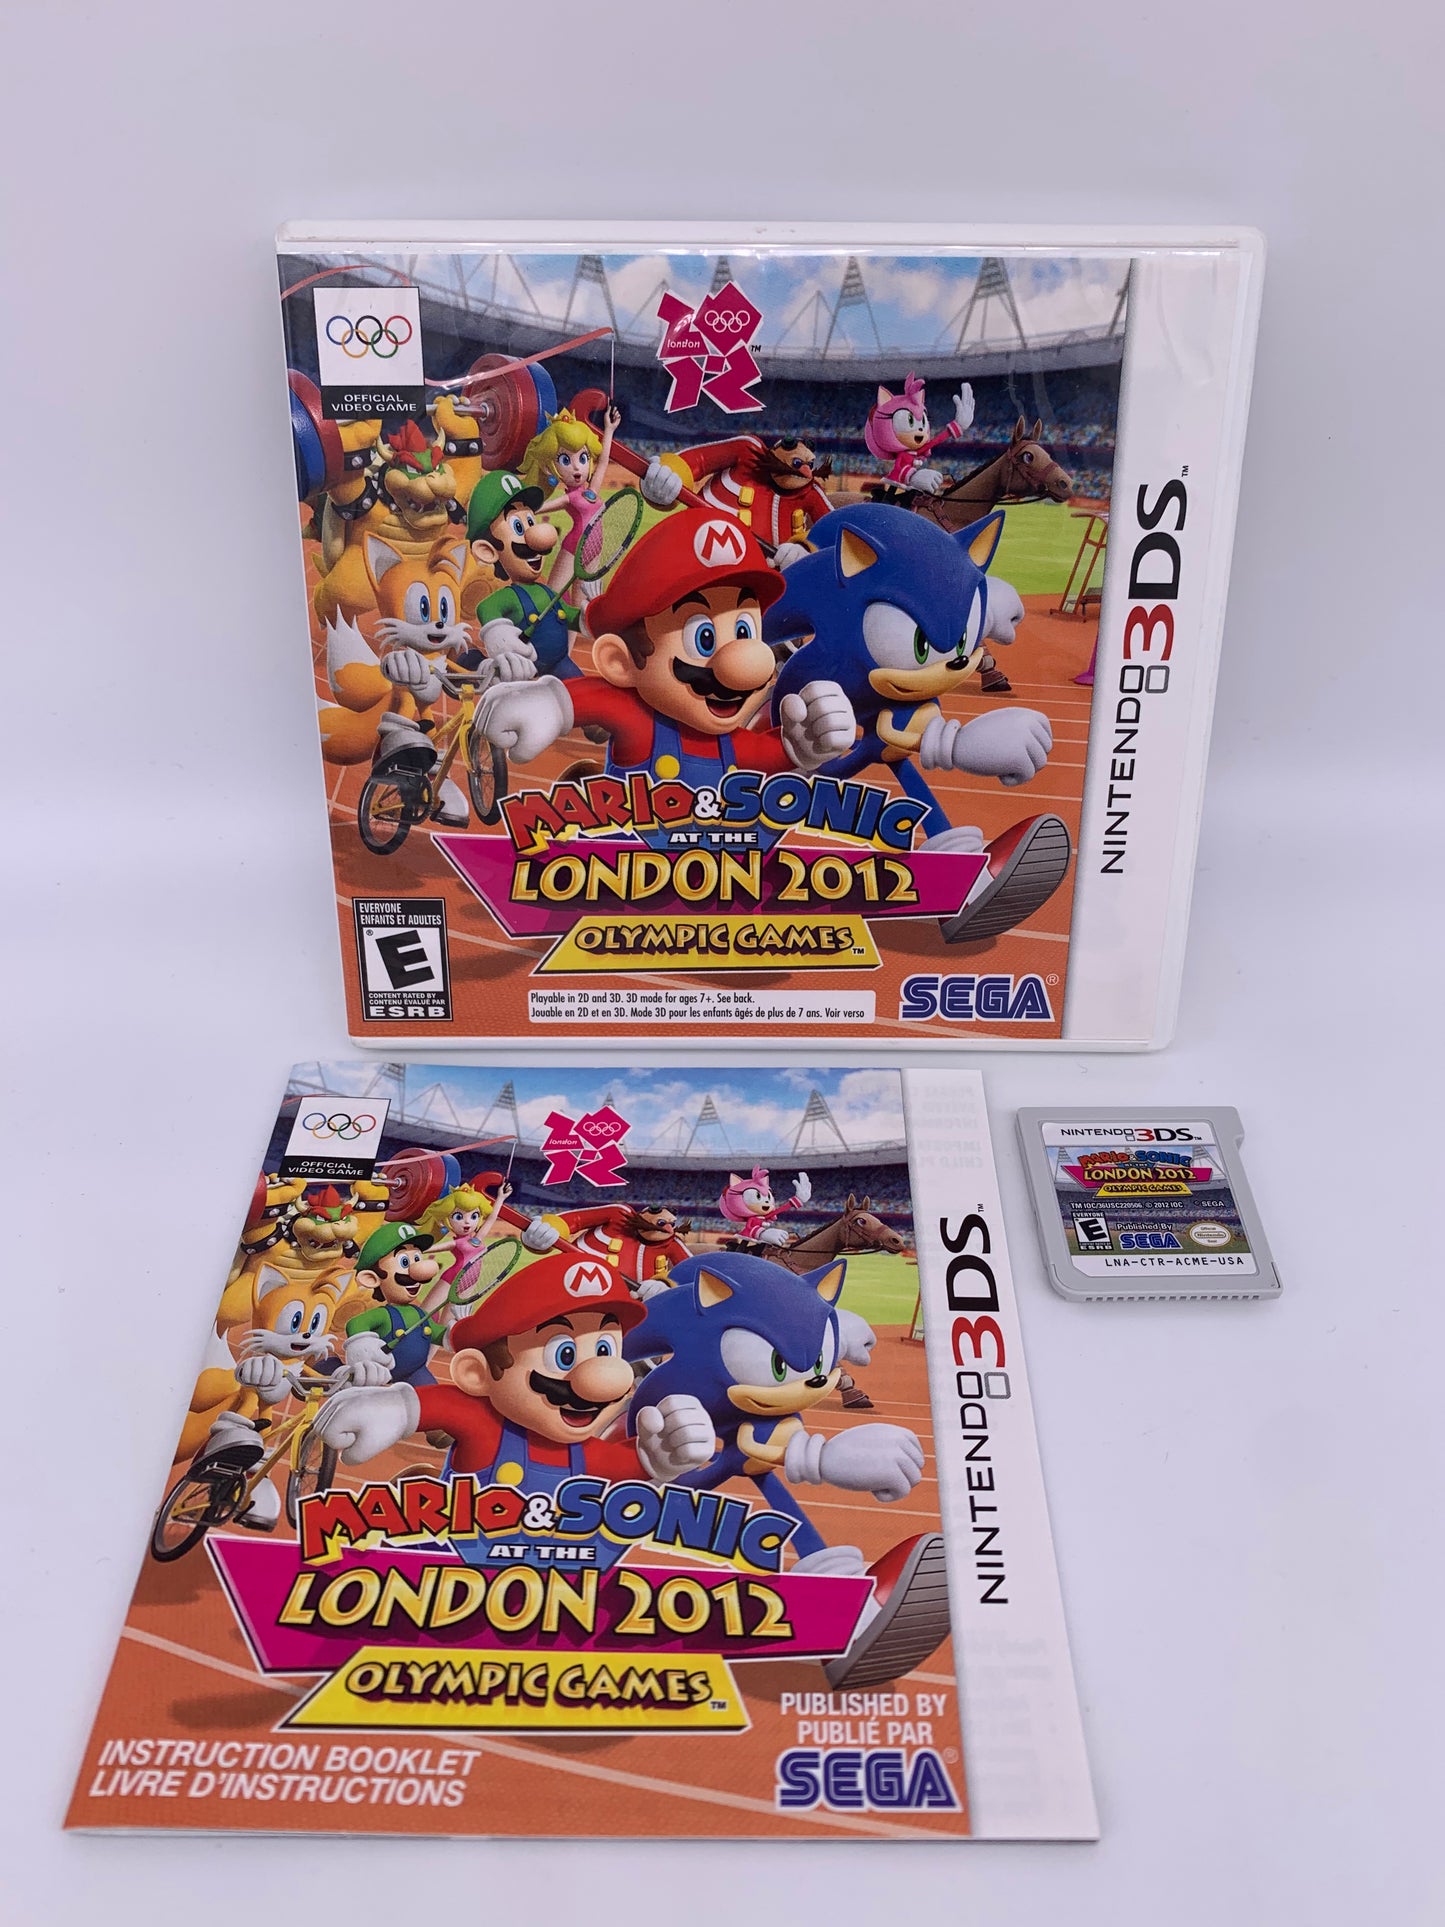 PiXEL-RETRO.COM : NINTENDO 3DS (3DS) COMPLETE CIB BOX MANUAL GAME NTSC MARIO & SONIC AT THE OLYMPIC GAMES LONDON 2012